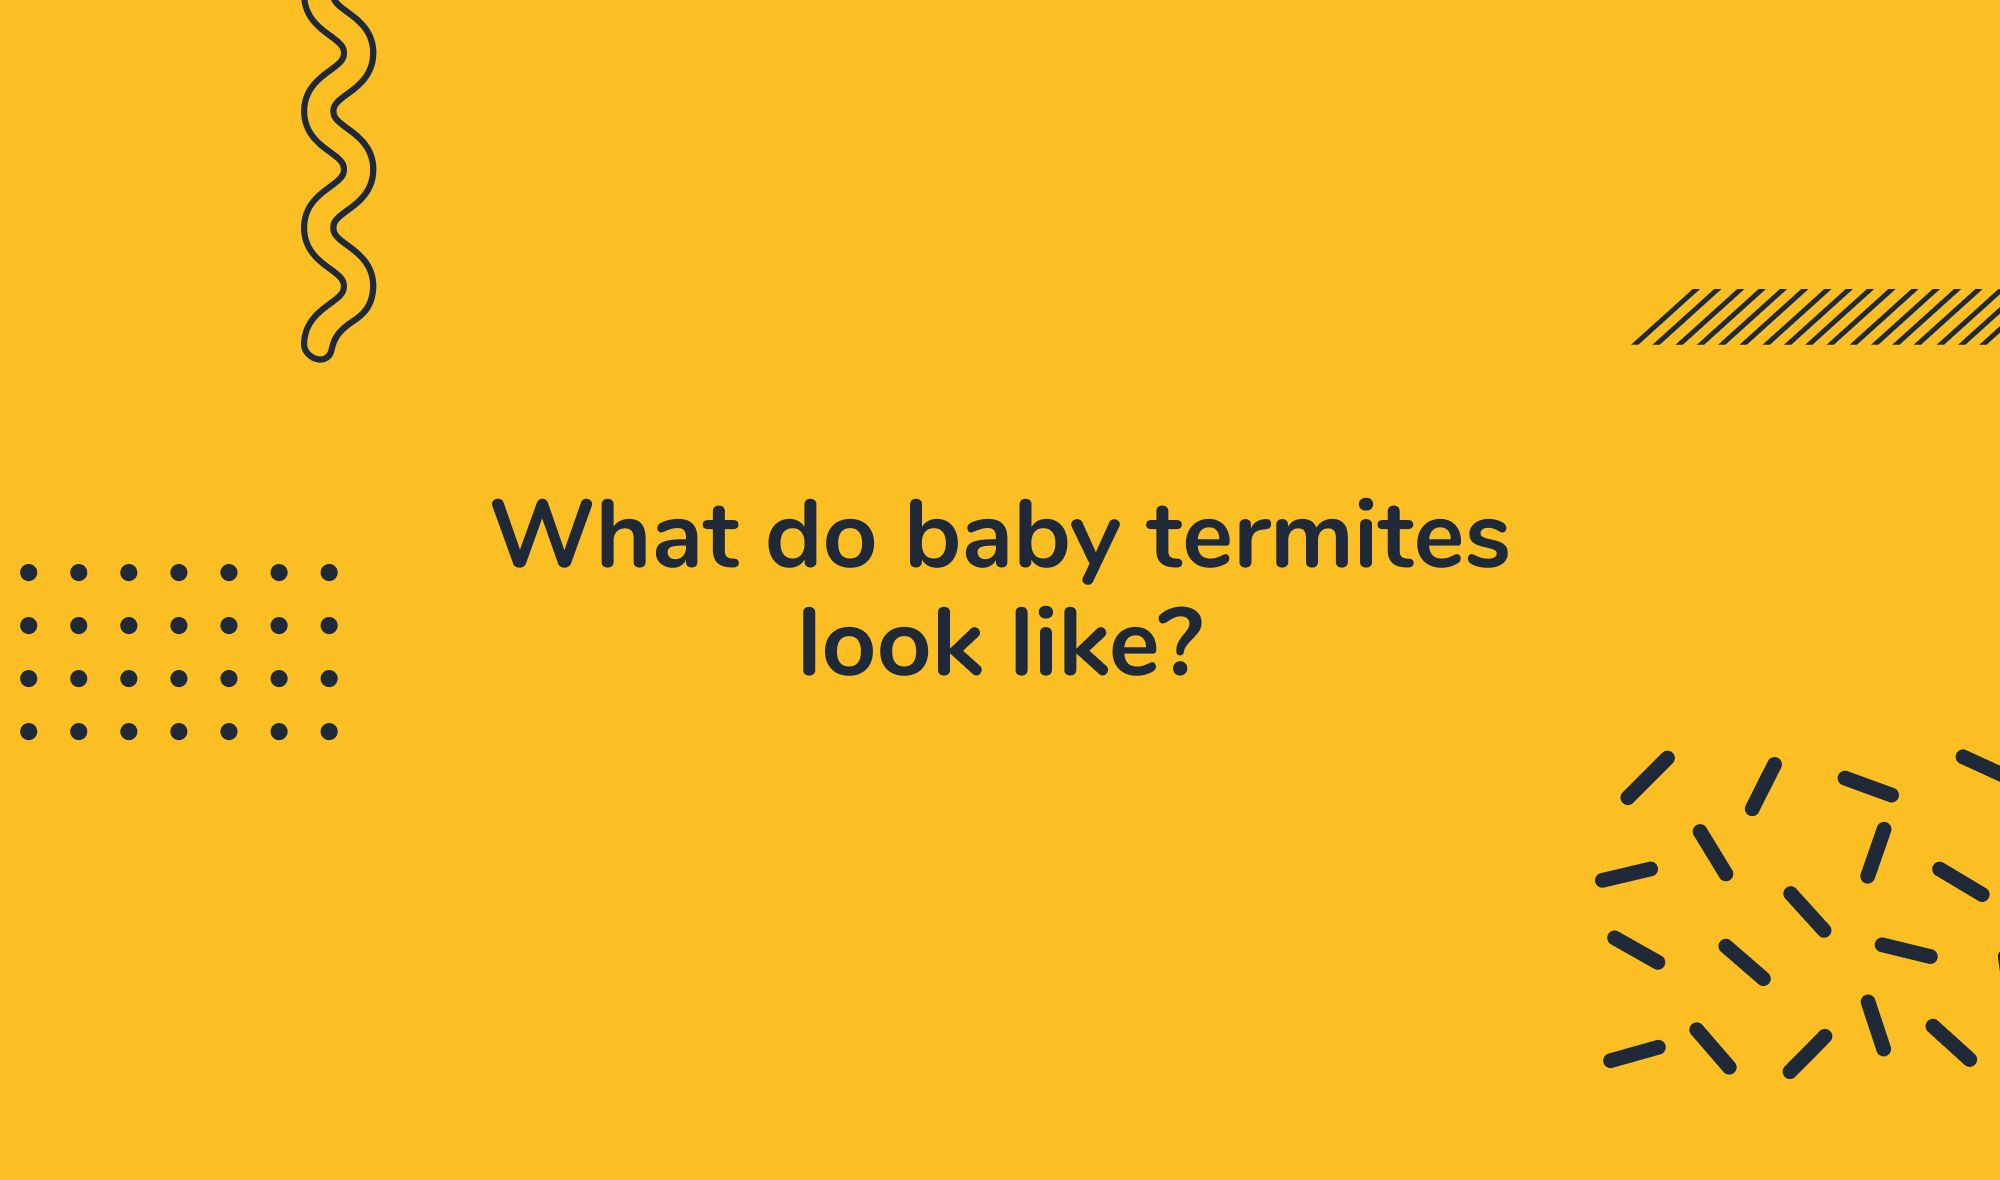 What do baby termites look like?